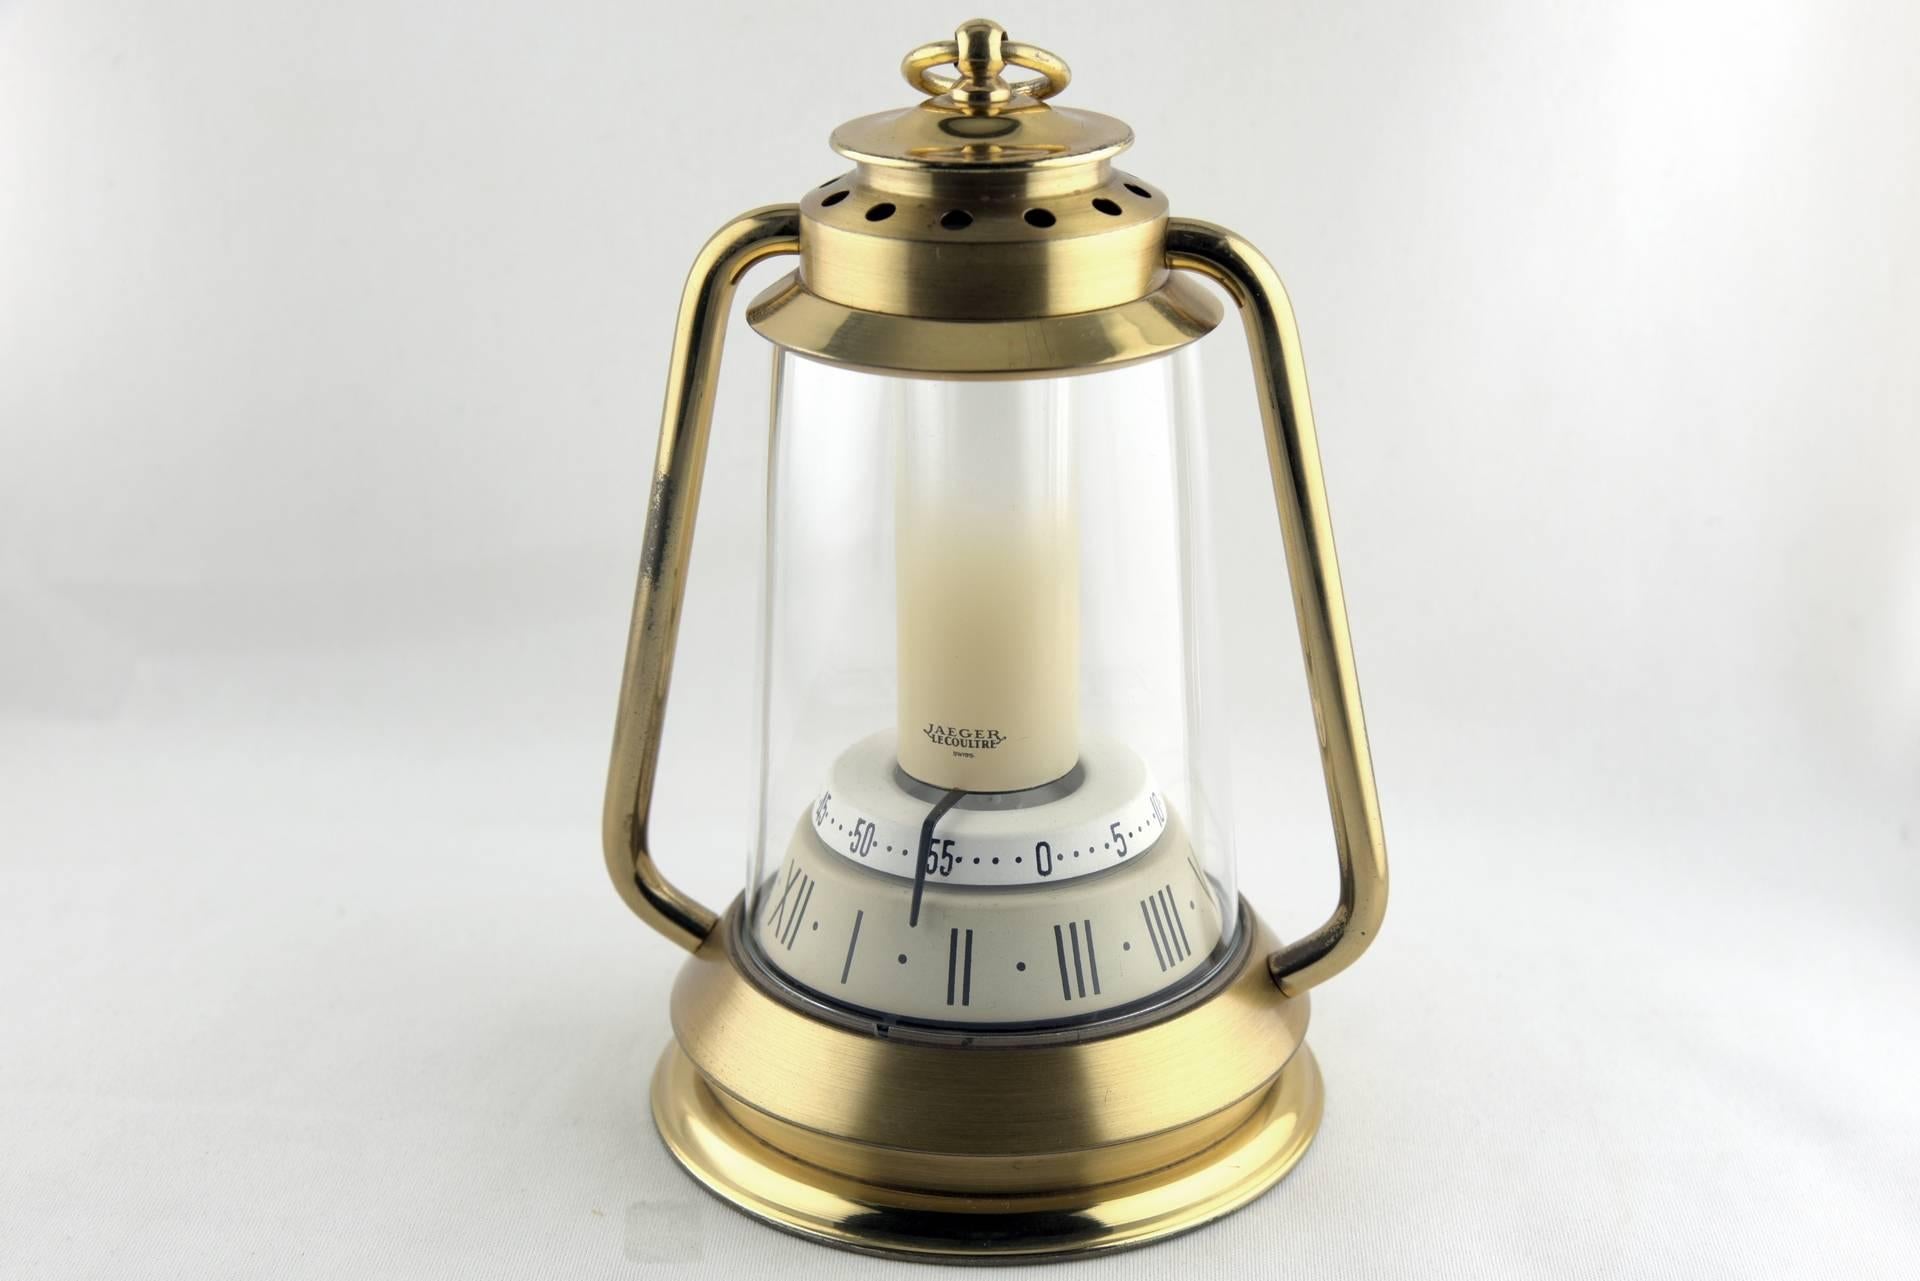 Highly rare table clock by Jaeger-LeCoultre in the form of a kerosene lamp. From the 1950s, the clock works very well and has few signs of wear.
With slight signs of use. Under glass cylinder, in brass housing, frosted, polished with protective